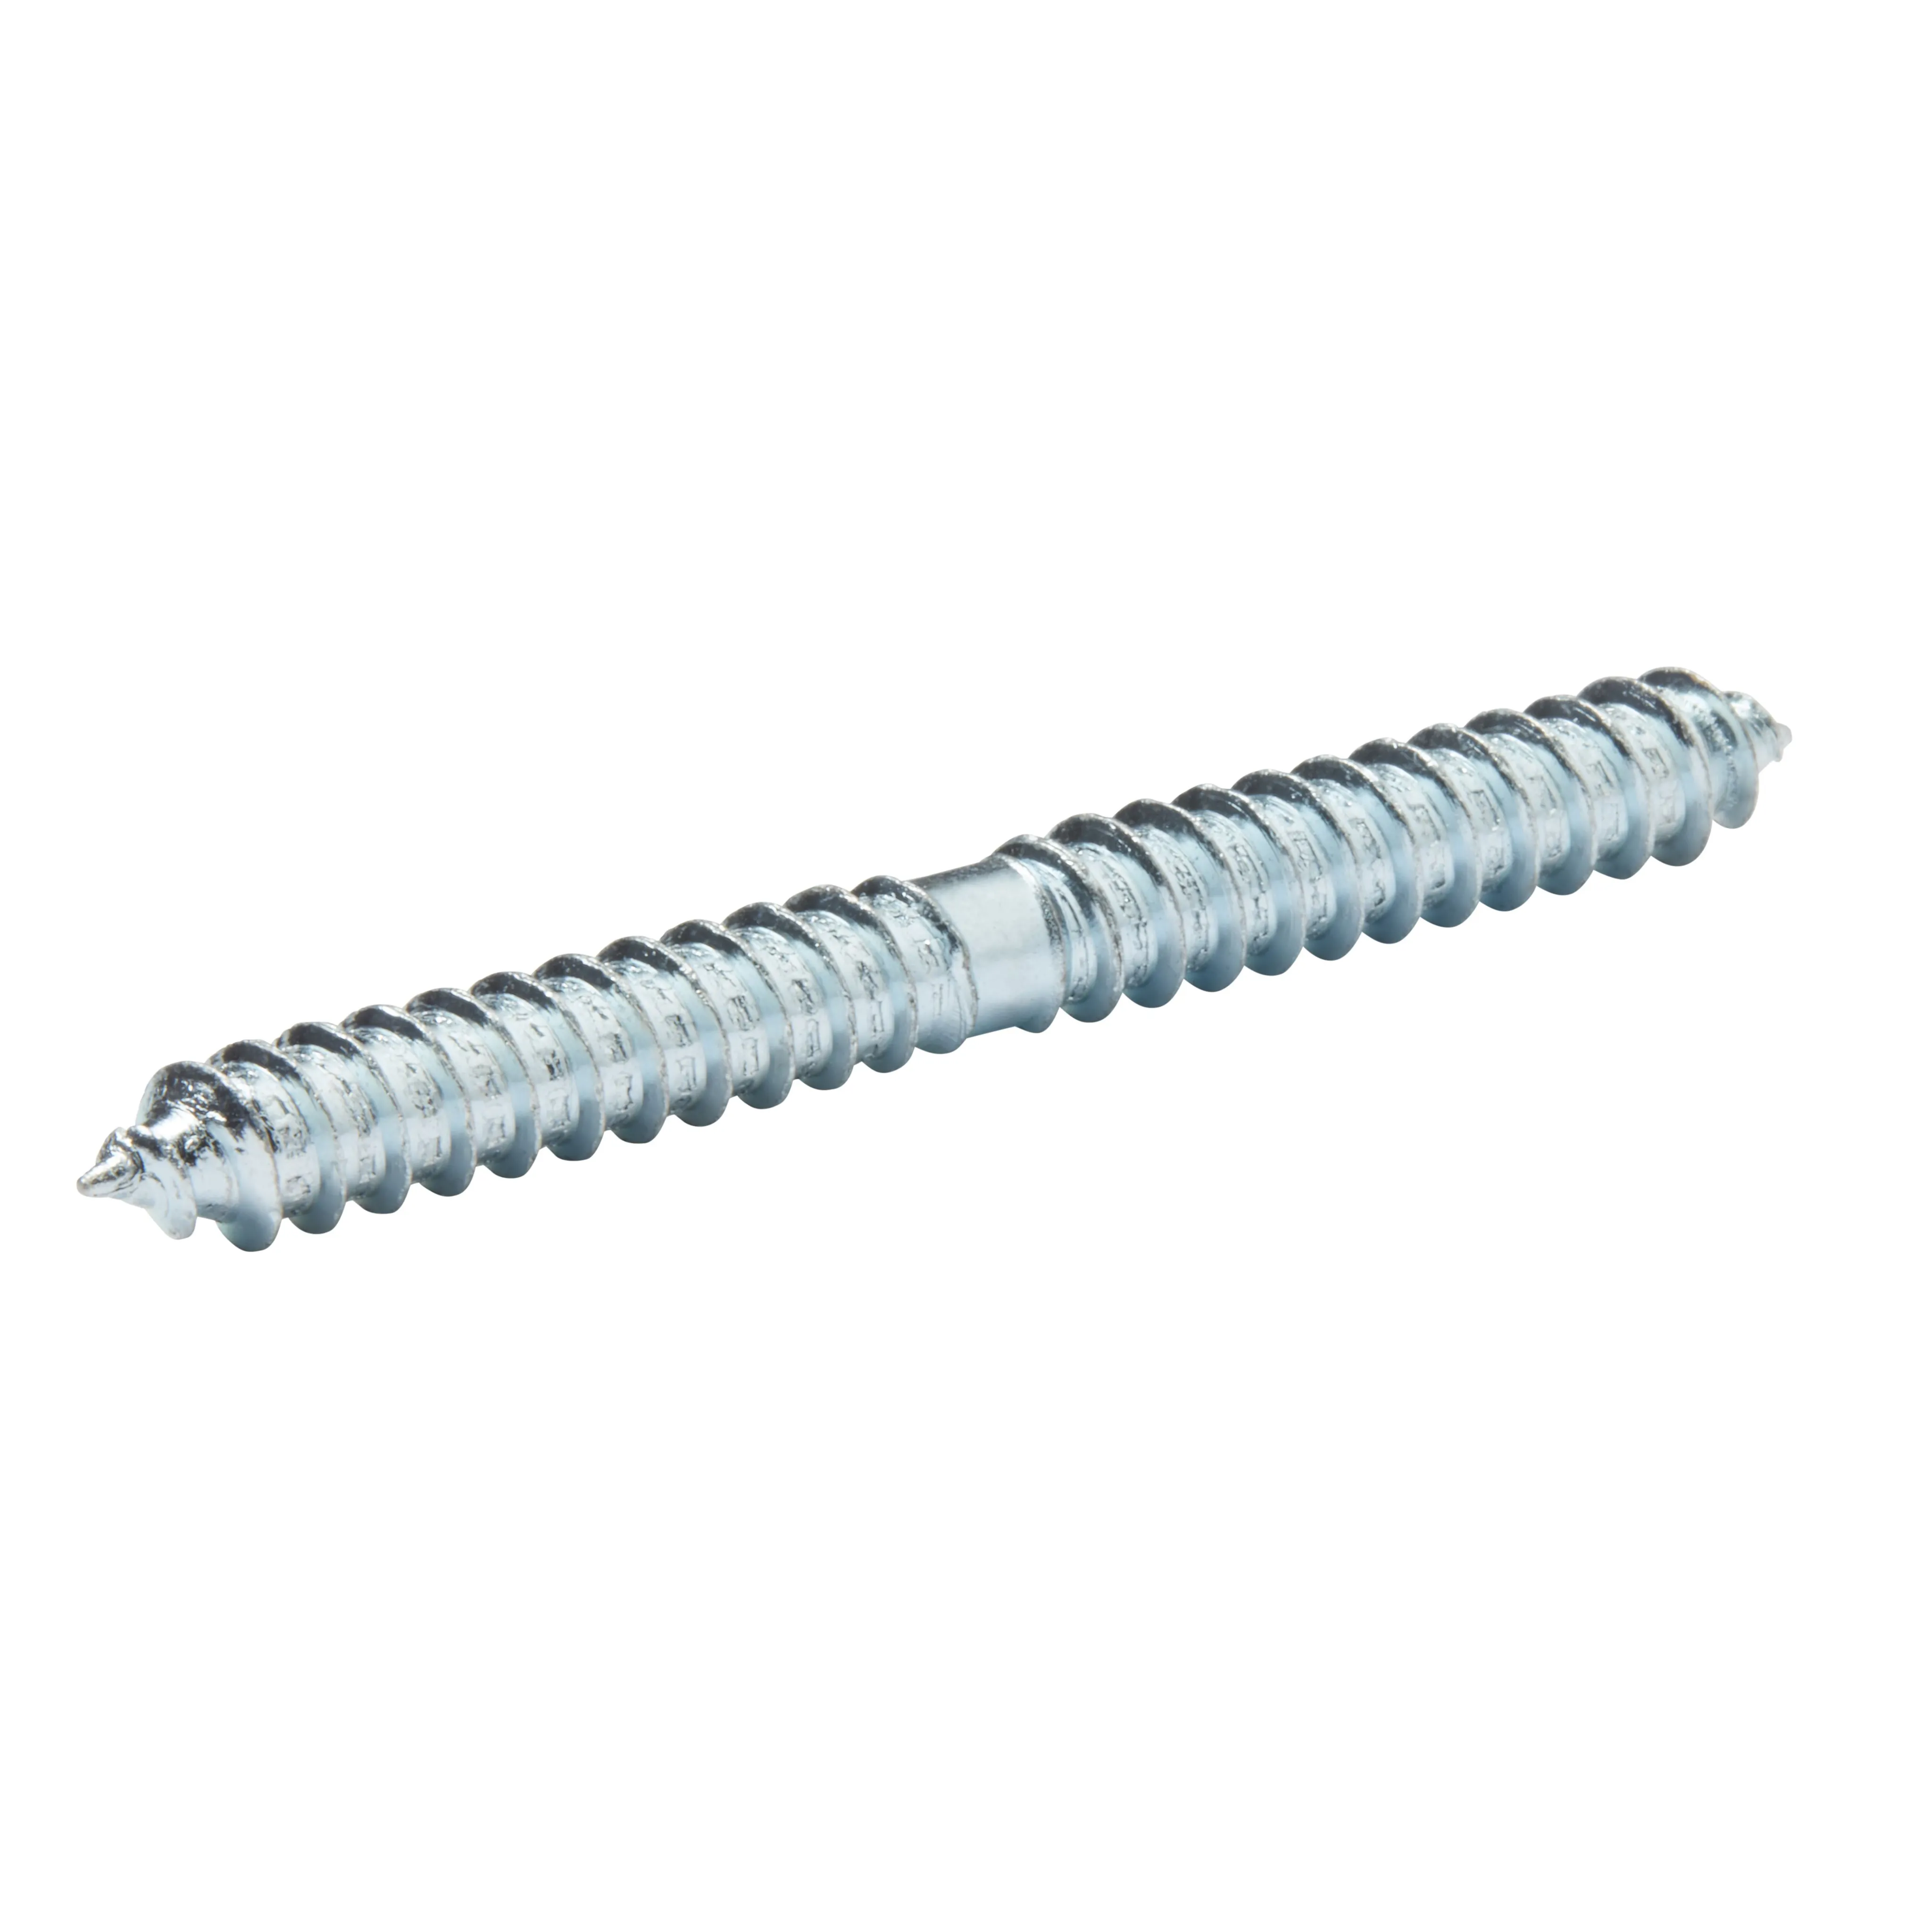 Diall Zinc-plated Carbon steel Dowel screw (Dia)8mm (L)80mm, Pack of 5